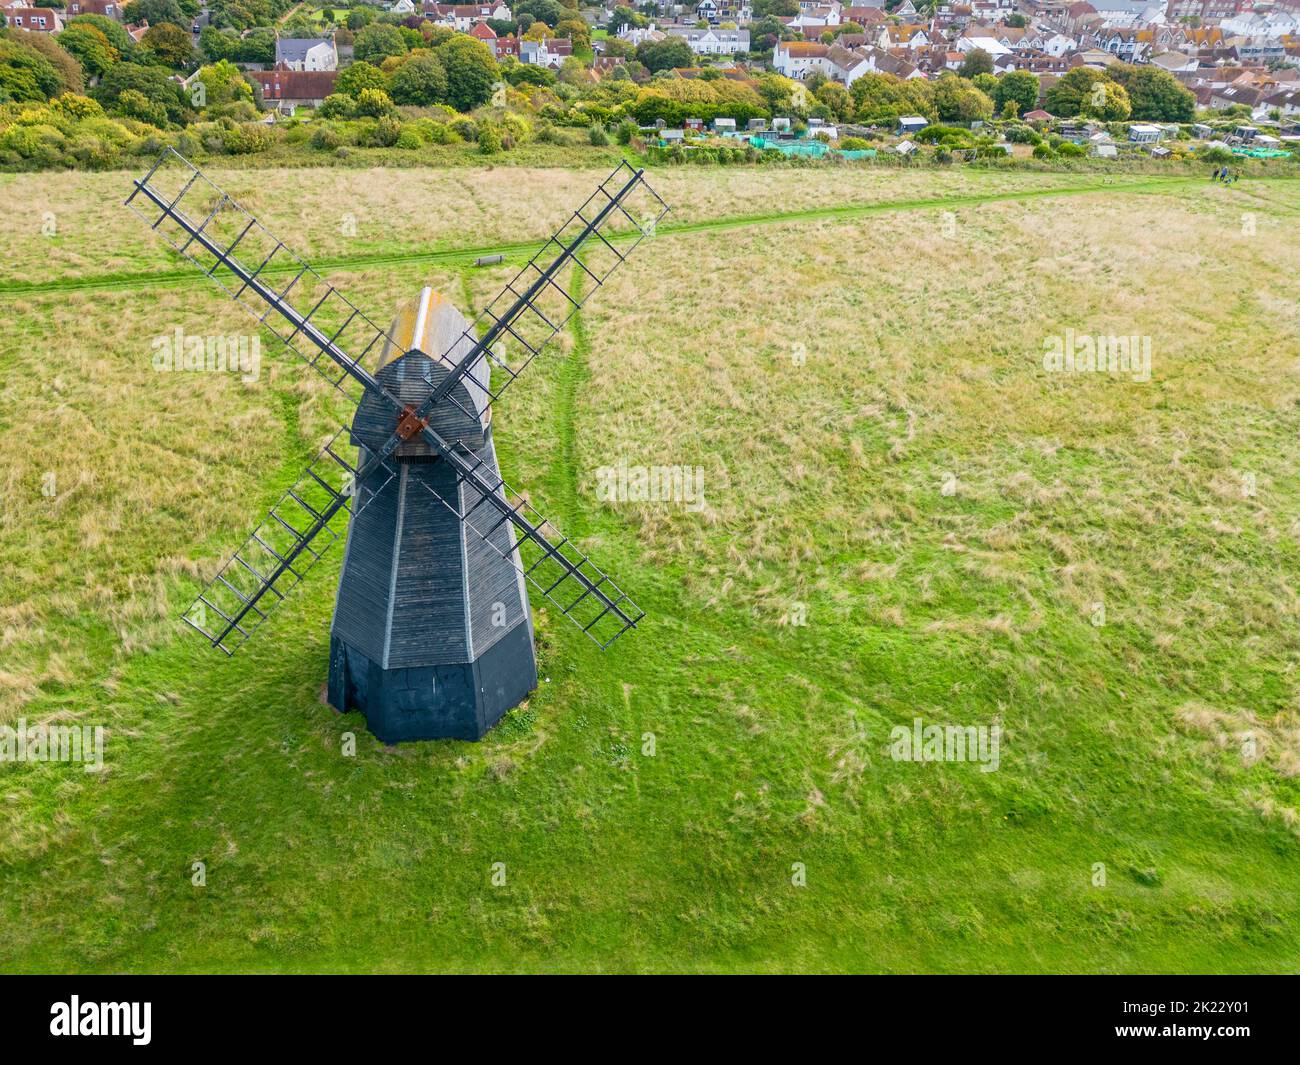 aerial view of rottingdean windmill or beacon mill a grade 2 listed smock mill built in 1802 on the east sussex coast Stock Photo